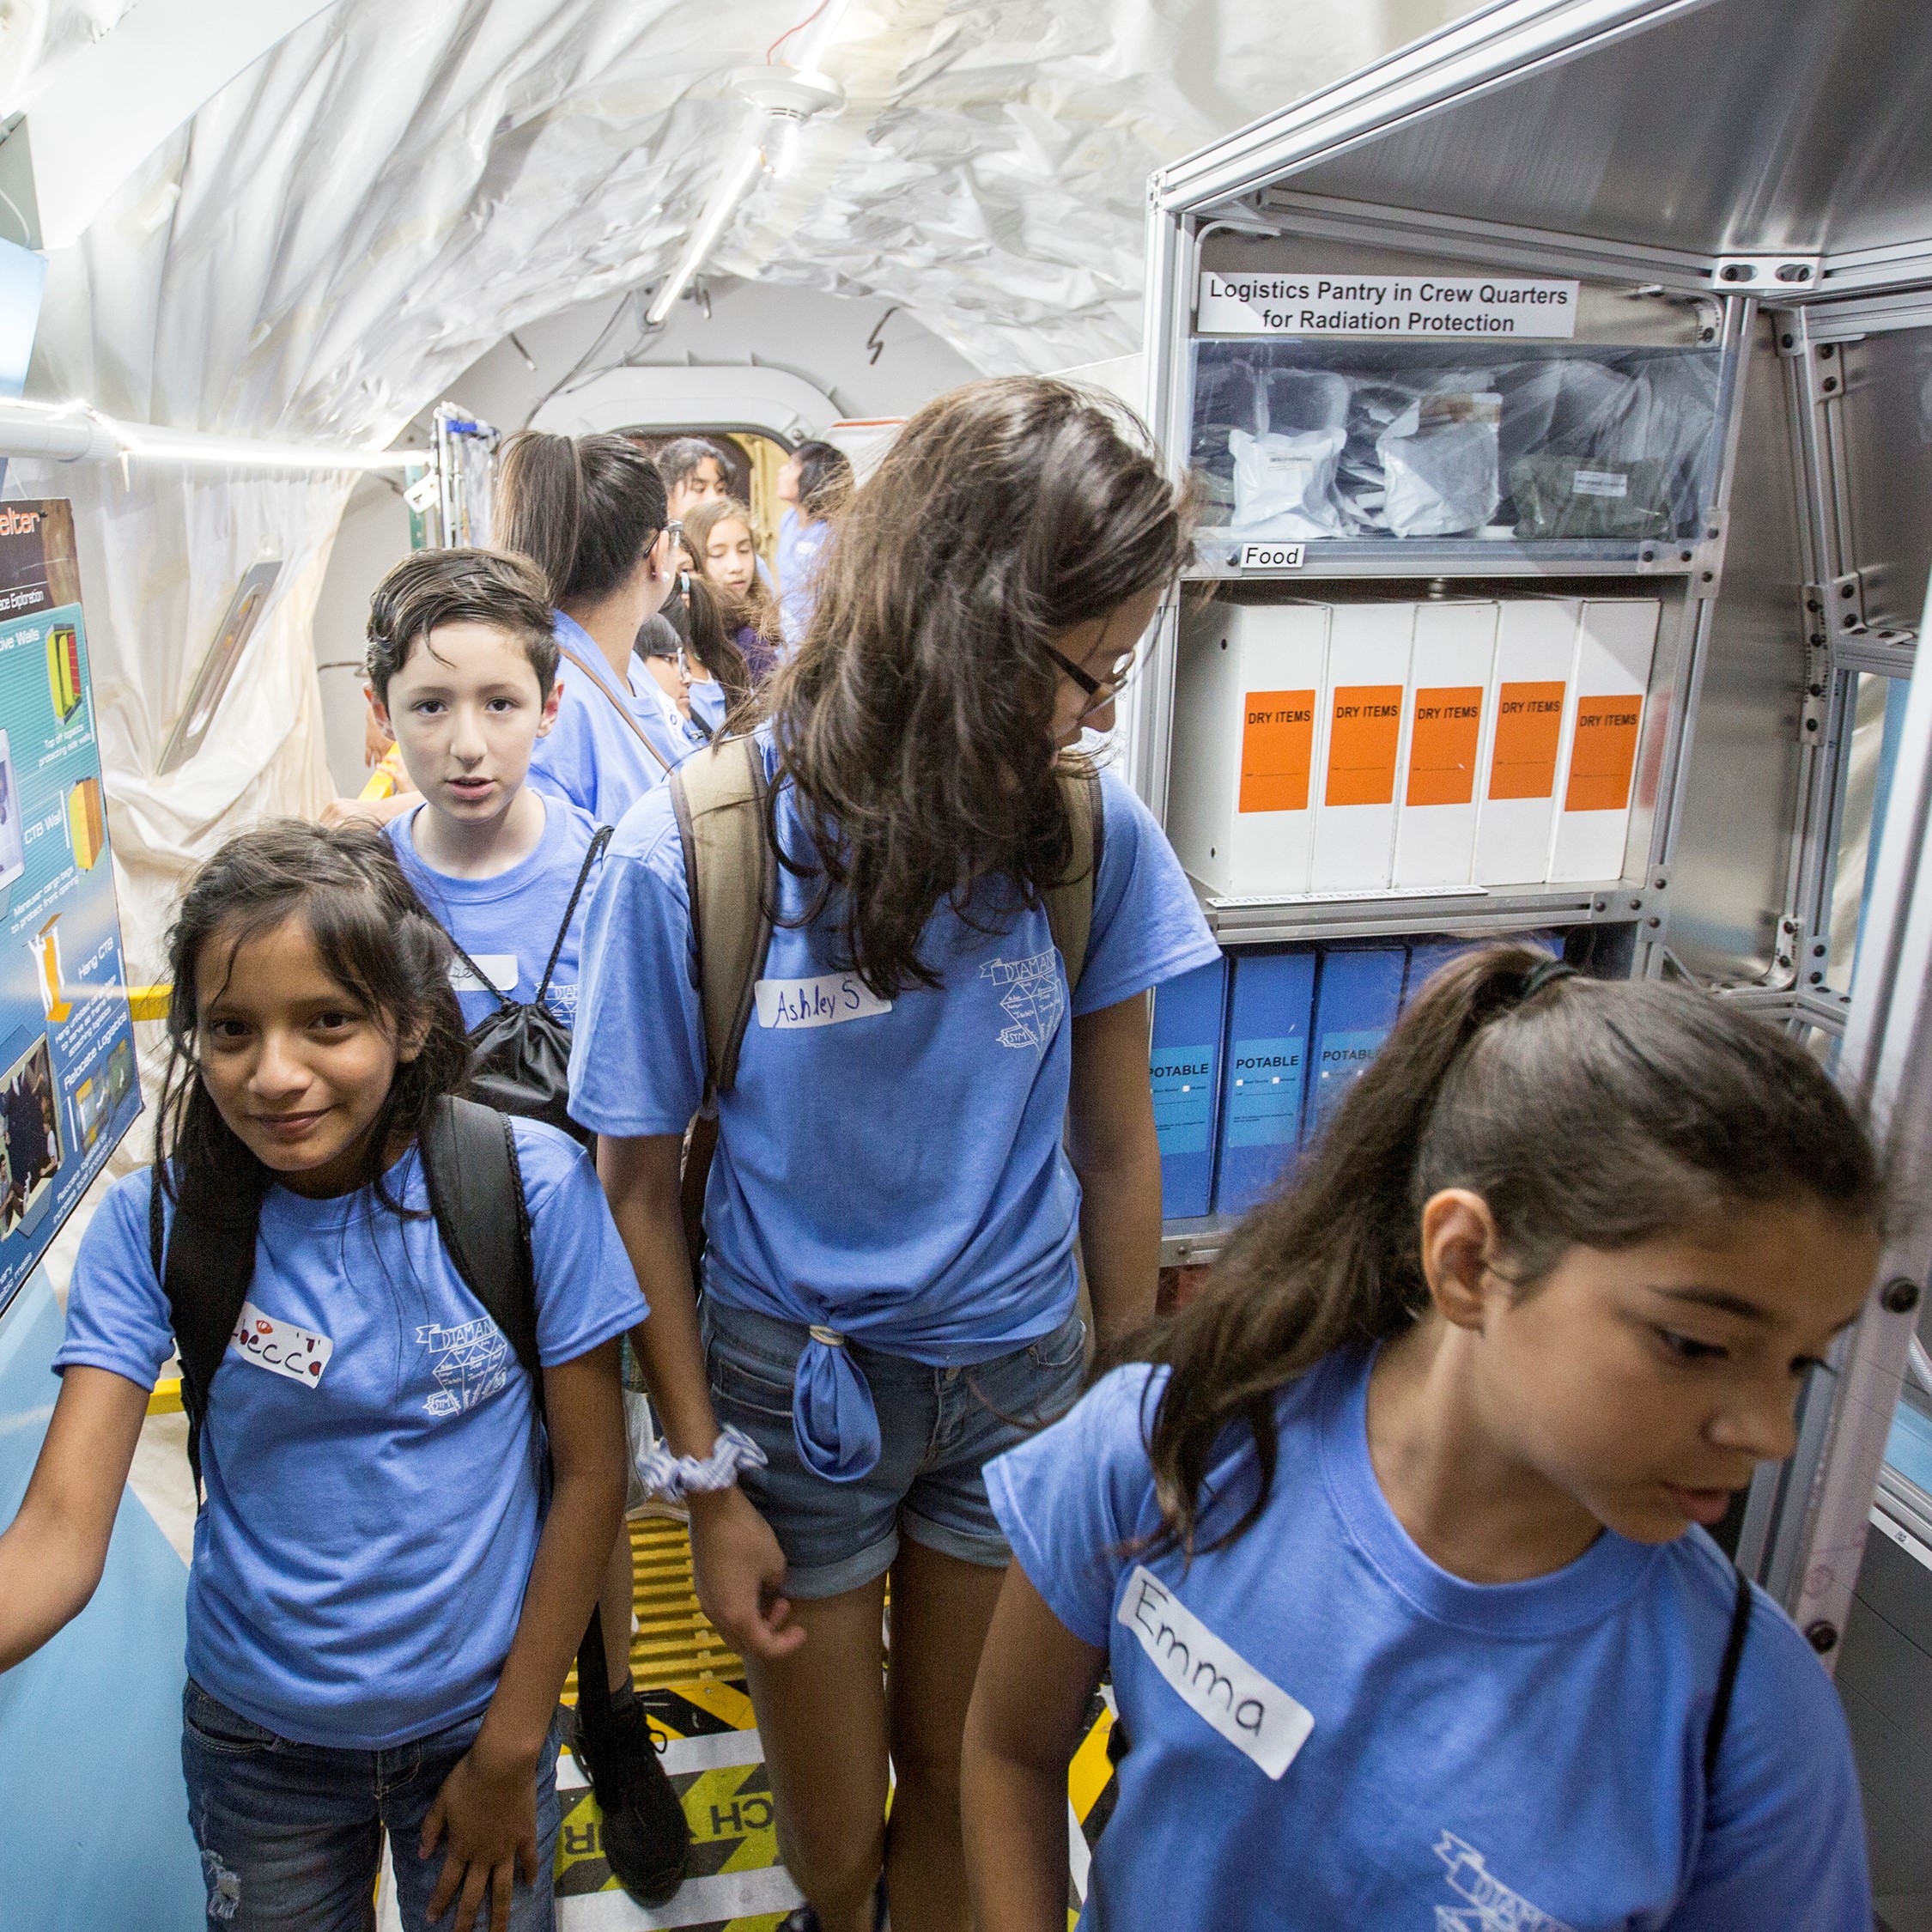 Rebecca, 11, and her classmates from Saint Thomas More Catholic School in Chapel Hill, North Carolina toured a prototype space habitat during their recent visit to NASA's Langley Research Center.